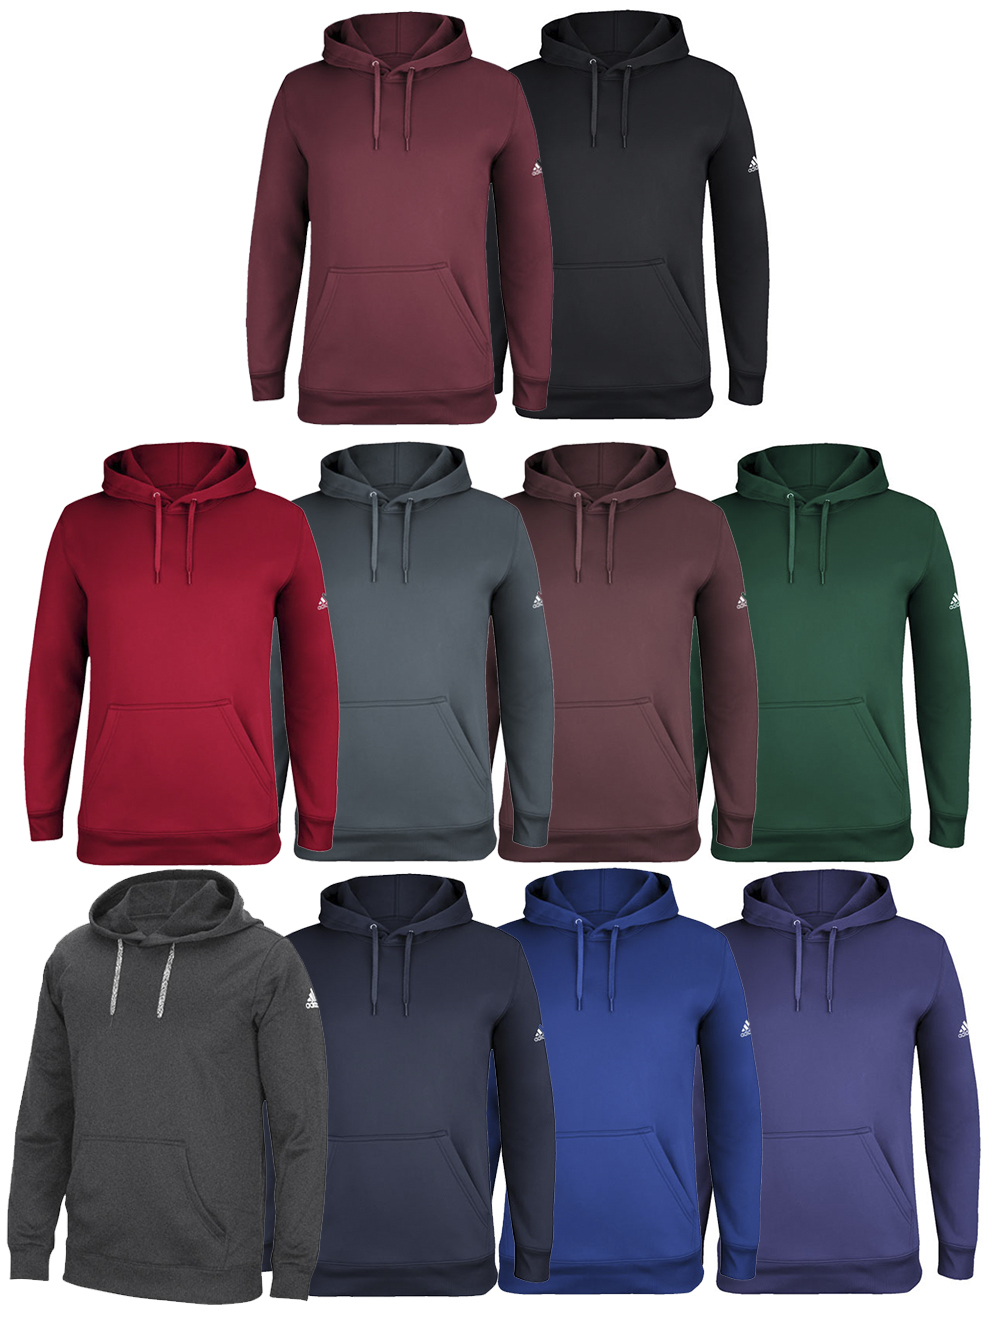 Adidas Mens Hoodie | Midwest Volleyball Warehouse